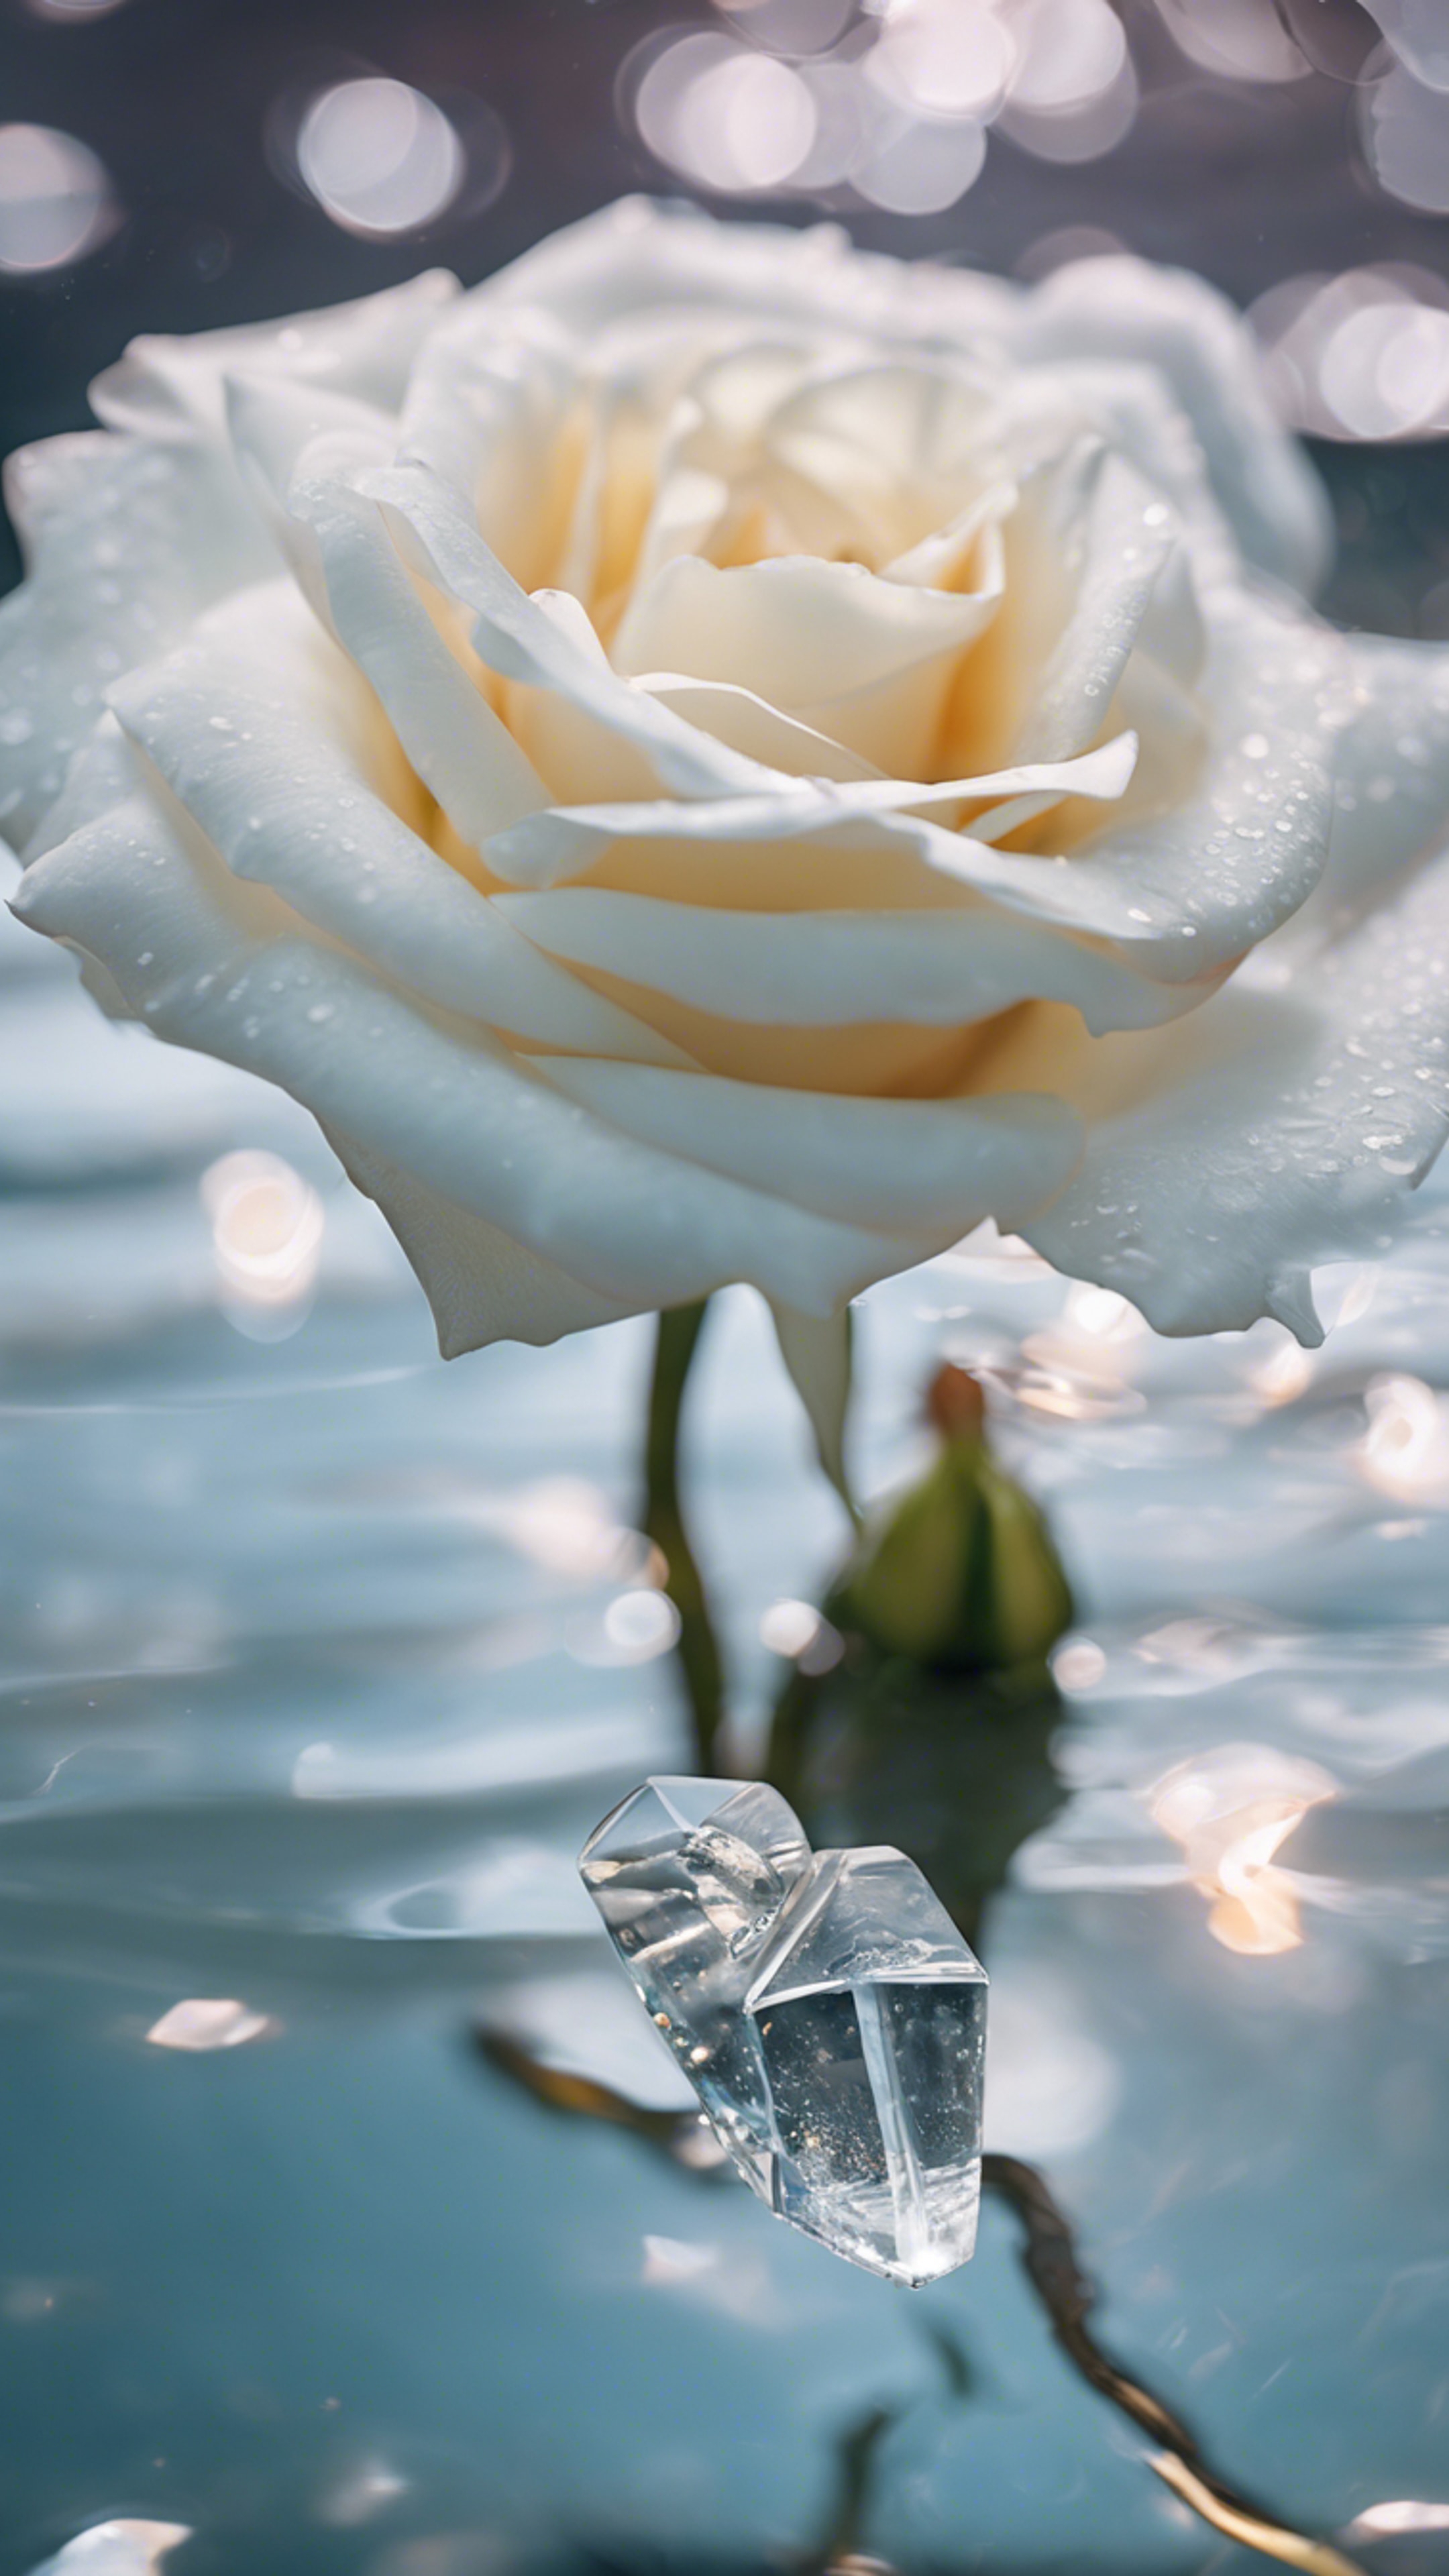 A white rose submerged in clear crystal water, petals gracefully spreading. Tapet[af81d3e8e21443b29805]